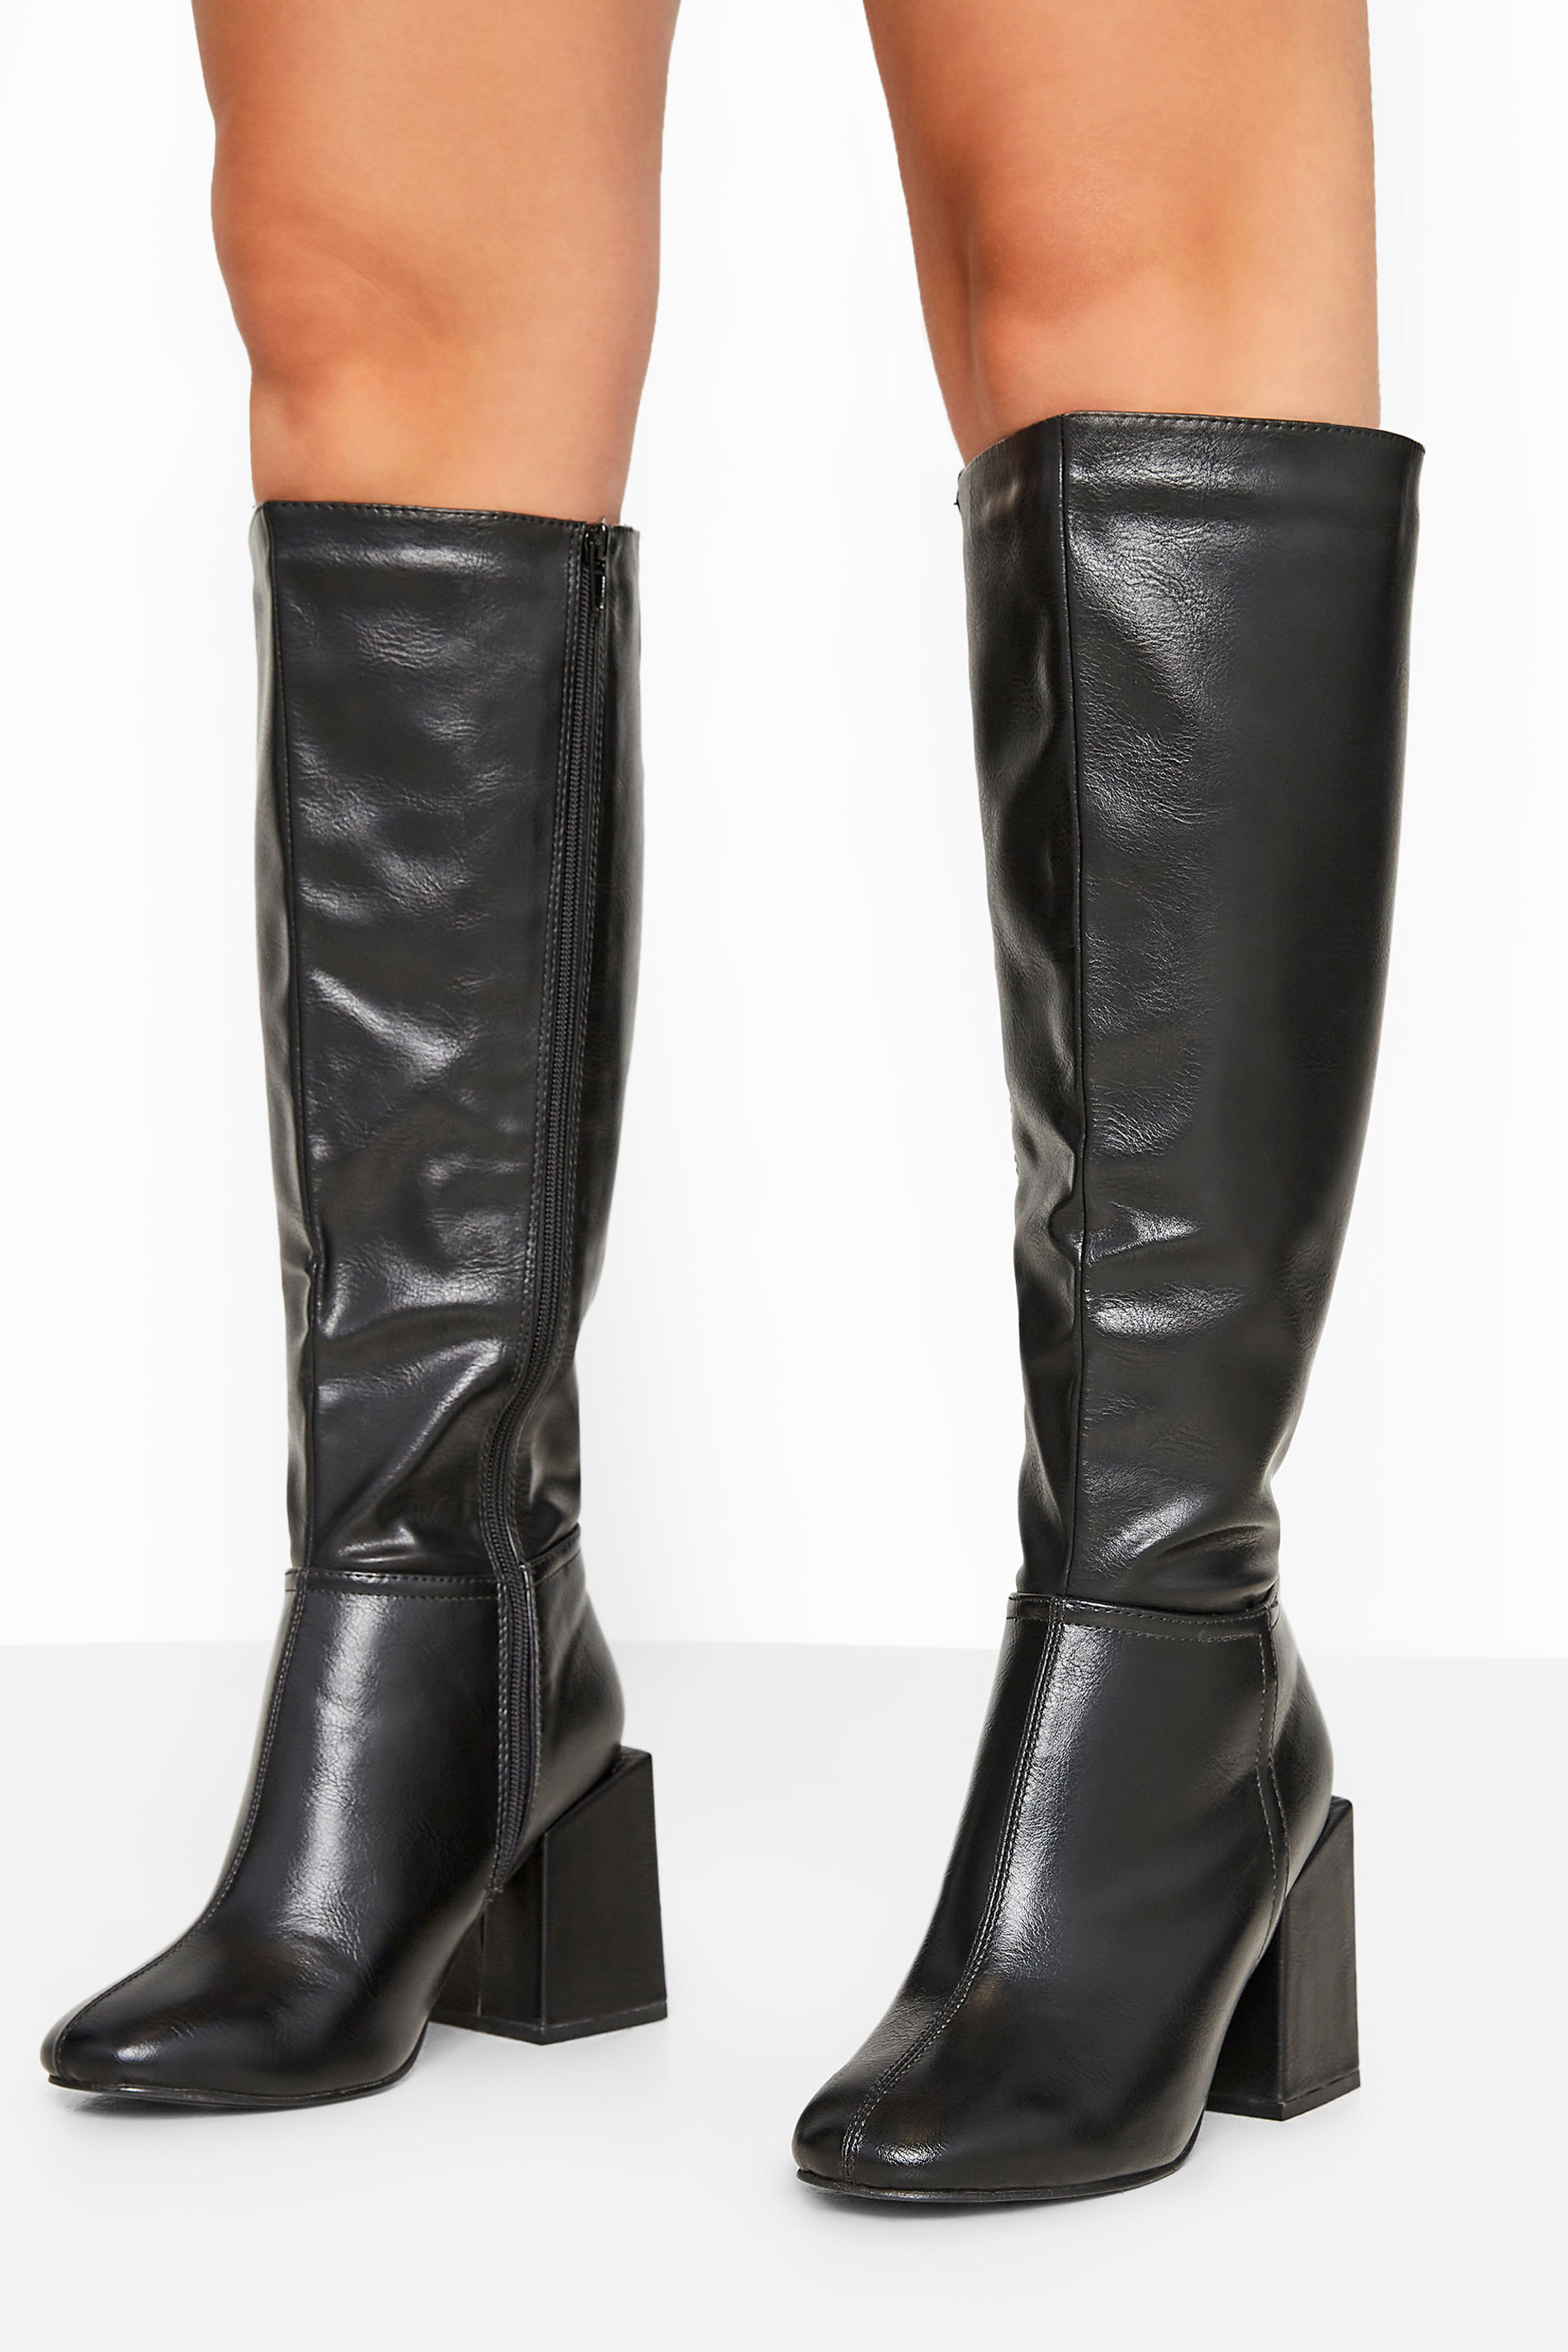 Limited Collection Black Vegan Leather Knee High Heeled Boots In Extra Wide Fit Yours Clothing